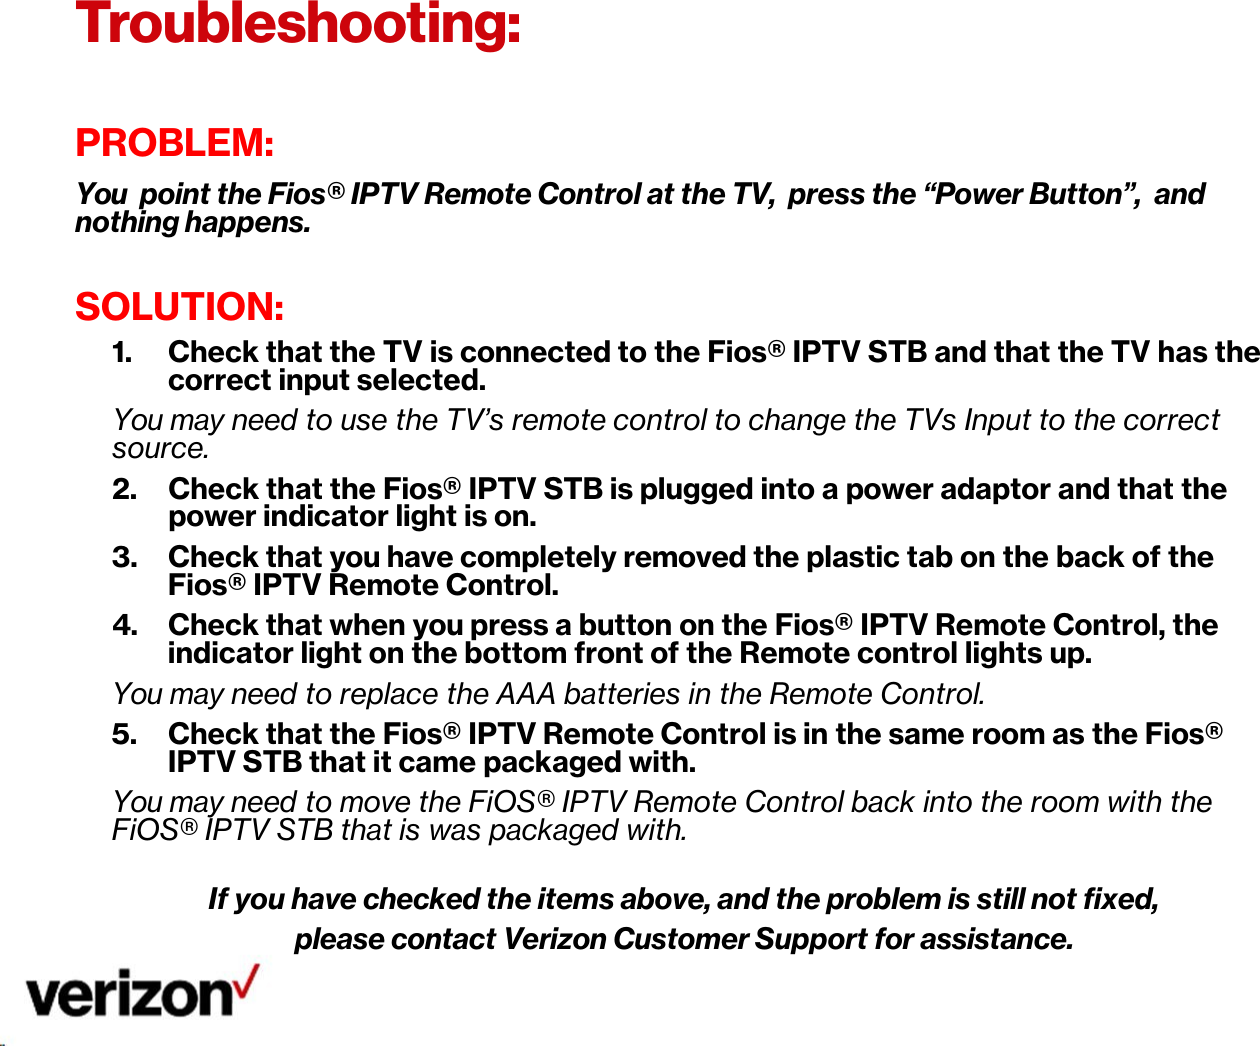 Troubleshooting:      PROBLEM: You point the Fios® IPTV Remote Control at the TV, press the “Power Button”, and nothing happens.  SOLUTION: 1. Check that the TV is connected to the Fios® IPTV STB and that the TV has the correct input selected. You may need to use the TV’s remote control to change the TVs Input to the correct source. 2. Check that the Fios® IPTV STB is plugged into a power adaptor and that the power indicator light is on. 3. Check that you have completely removed the plastic tab on the back of the Fios® IPTV Remote Control. 4. Check that when you press a button on the Fios® IPTV Remote Control, the indicator light on the bottom front of the Remote control lights up. You may need to replace the AAA batteries in the Remote Control. 5. Check that the Fios® IPTV Remote Control is in the same room as the Fios® IPTV STB that it came packaged with. You may need to move the FiOS® IPTV Remote Control back into the room with the FiOS® IPTV STB that is was packaged with.  If you have checked the items above, and the problem is still not fixed, please contact Verizon Customer Support for assistance. 